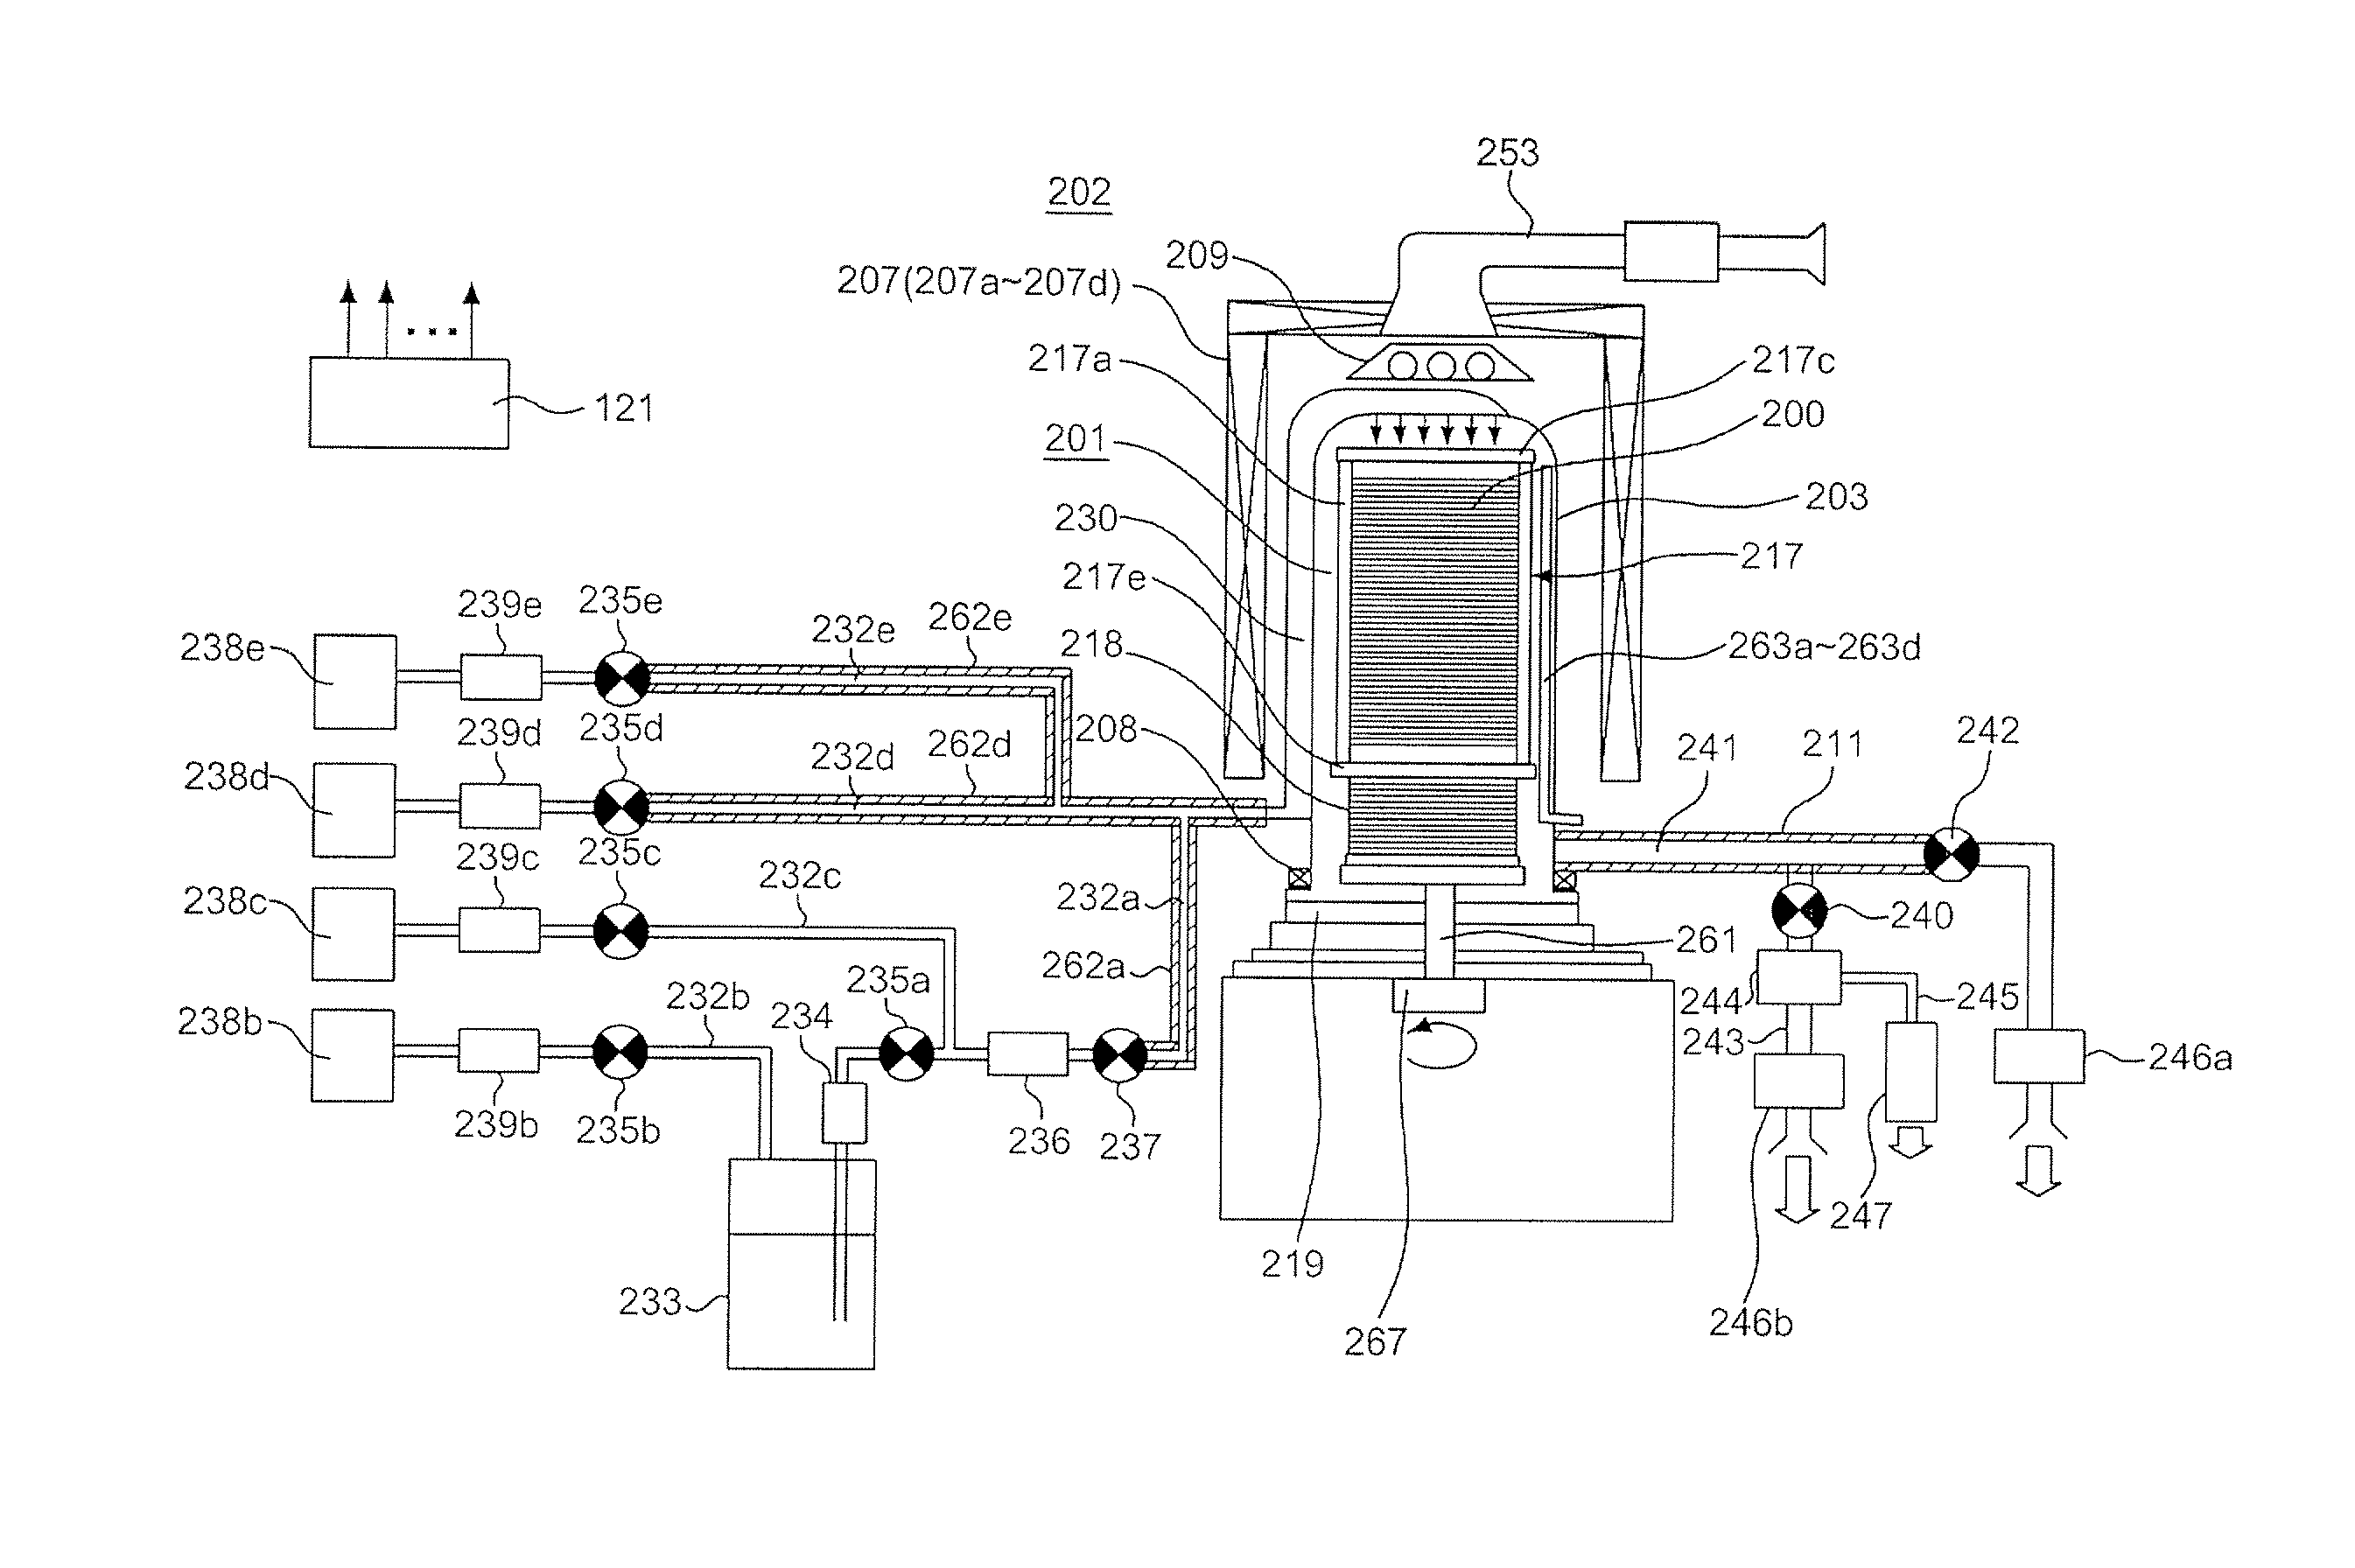 Substrate processing apparatus, method of manufacturing semiconductor device and furnace lid